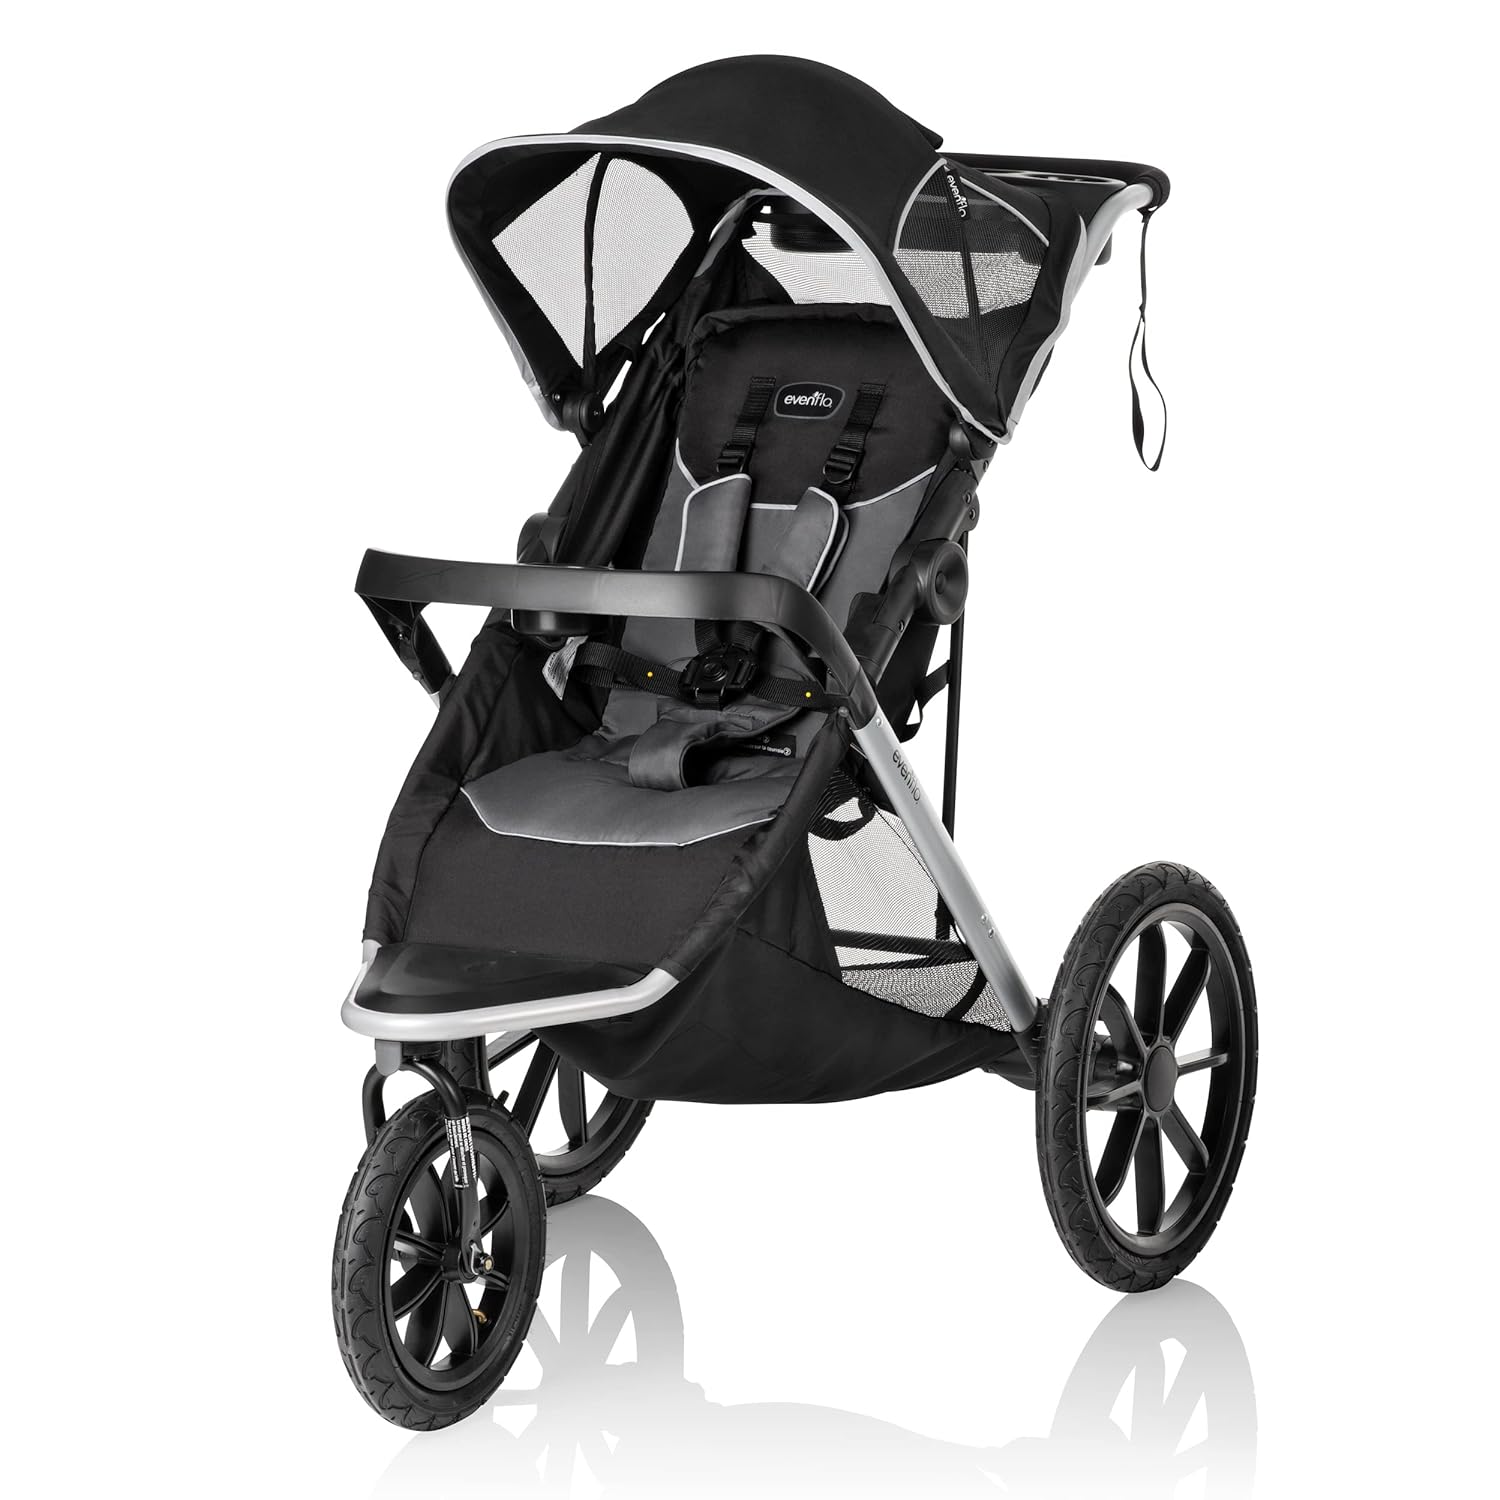 Evenflo Victory Plus Jogger Stroller, Compact, Lightweight, Self-Standing, Ample Storage, Large Tires, Swivel Wheel, Full Coverage Canopy, Multi-Reclining Seat, Compatible With LiteMax Infant Car Seat - image 3 of 11